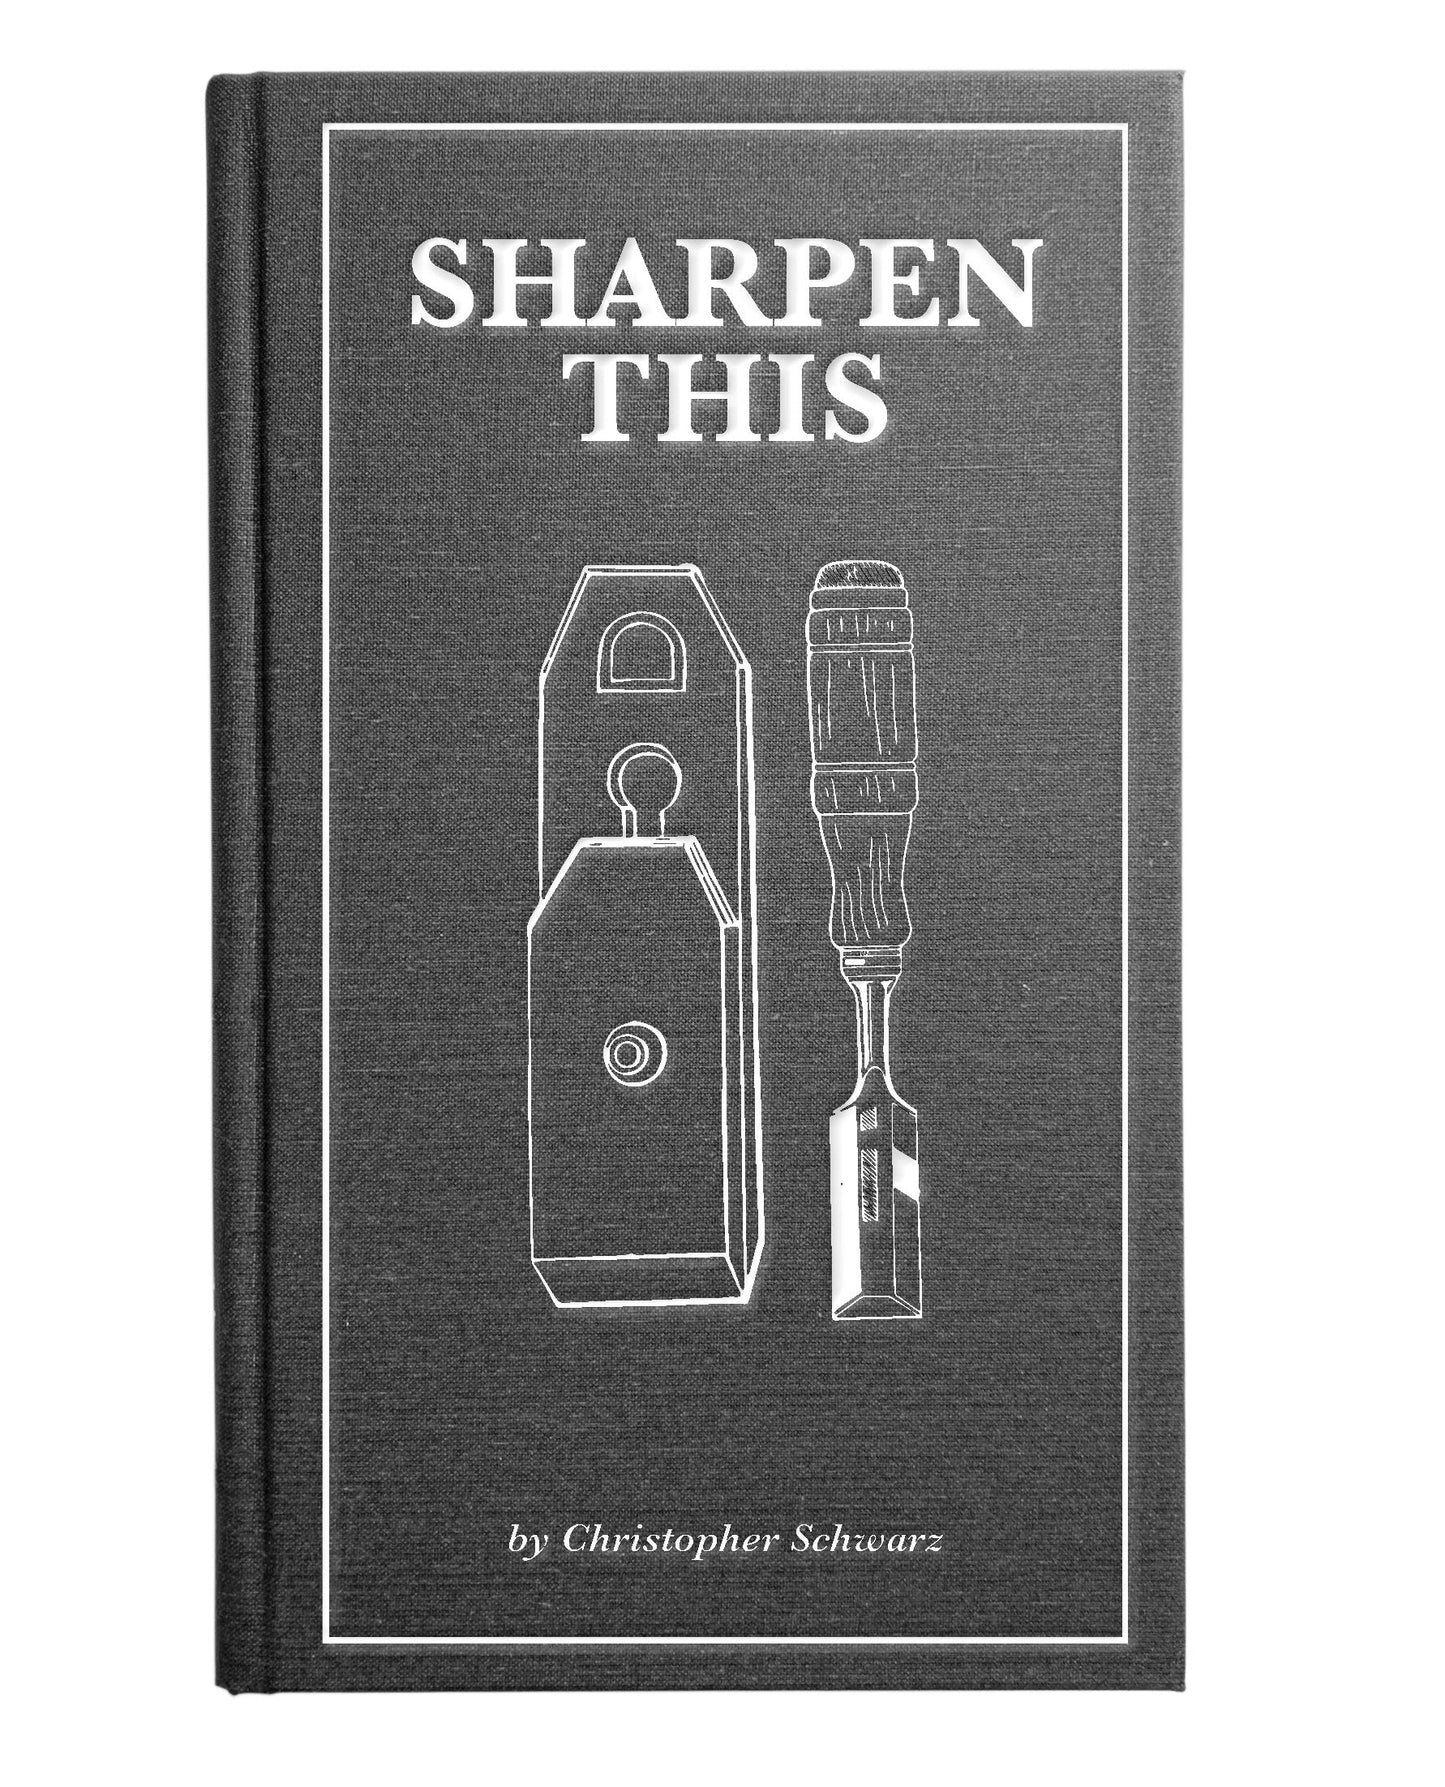 Sharpen This (signed by the author + PG-13 Sticker) by Christopher Schwarz, Lost Art Press